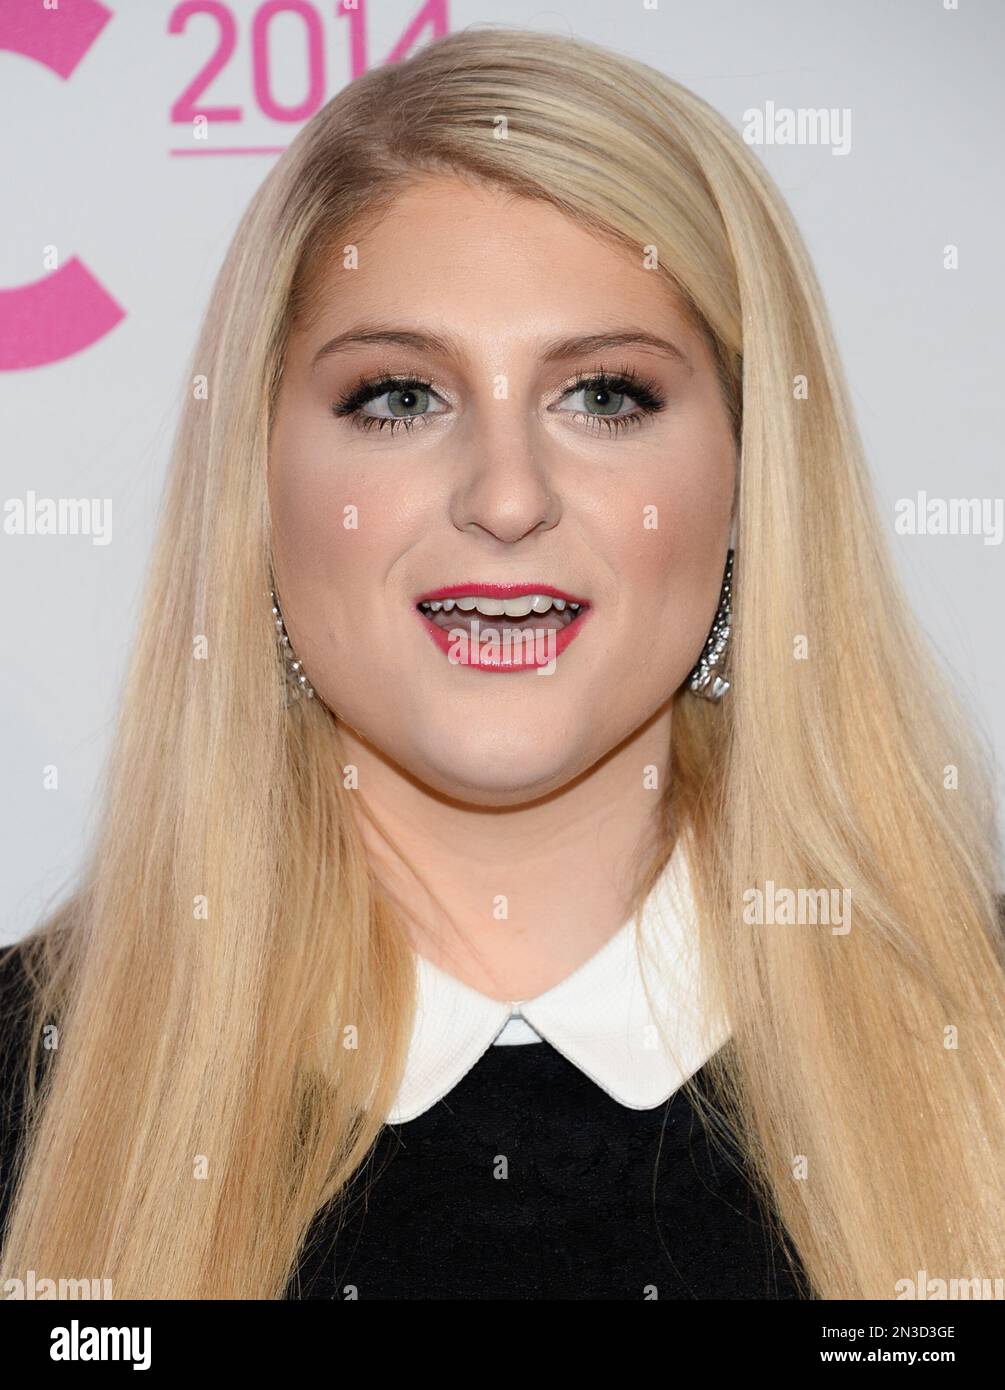 Singer Meghan Trainor attends the 2014 iHeartRadio Music Festival at the  MGM Grand Garden Arena in Las Vegas Stock Photo - Alamy